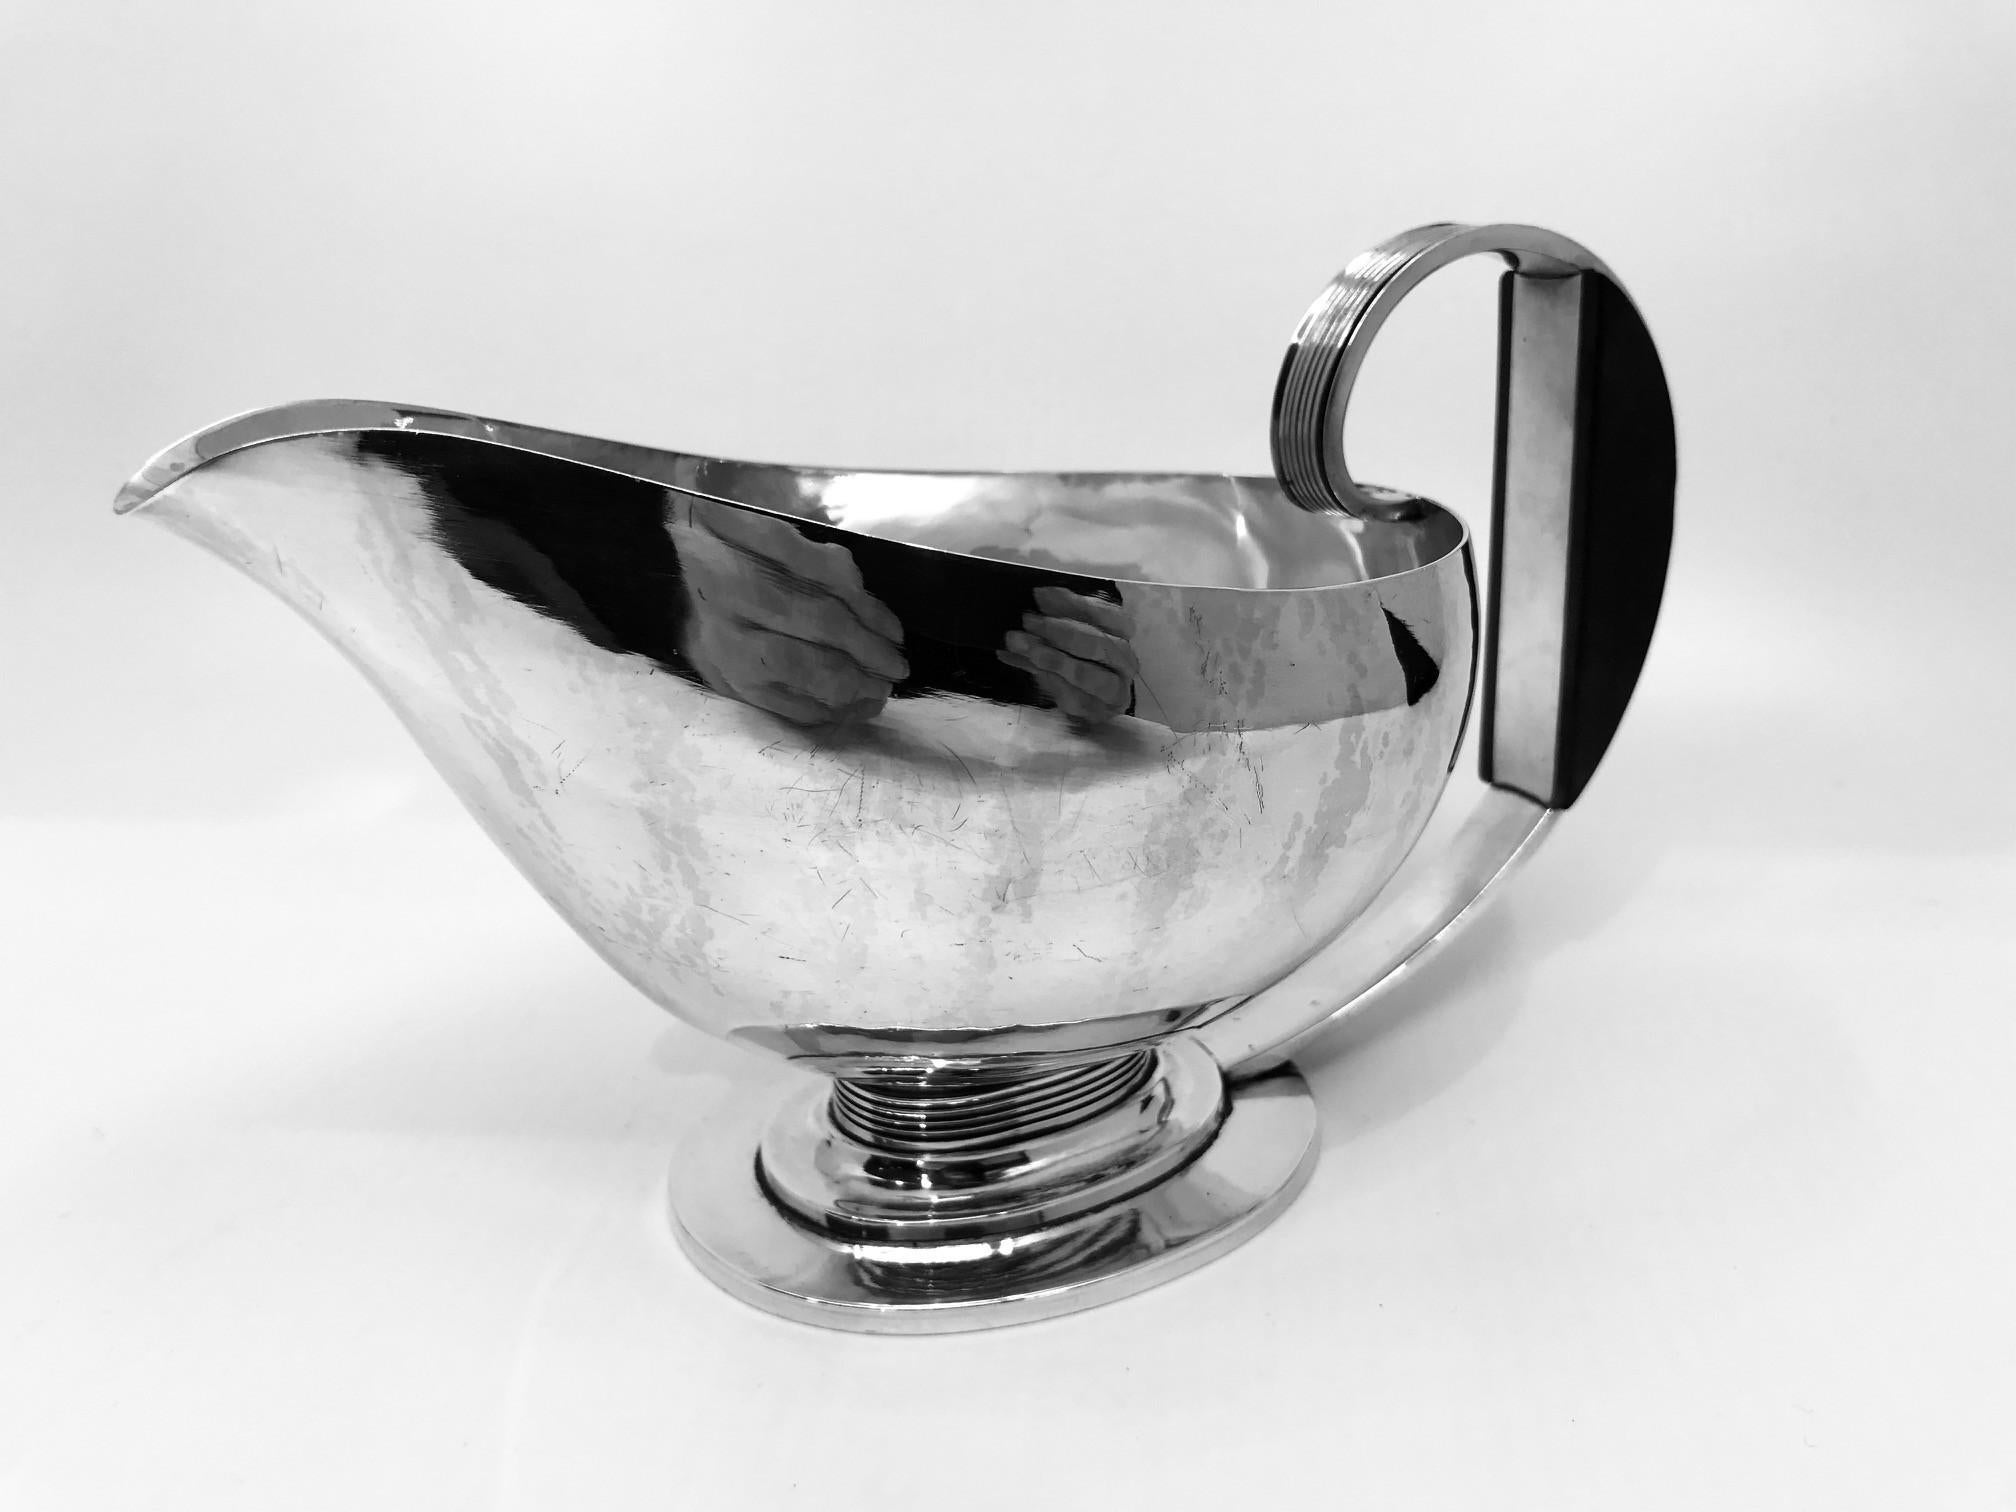 A rare sterling silver Georg Jensen Art Deco sauce boat with ebony handle, design #766 by Gustav Pedersen from 1938. Gustav Pedersen only designed a very few pieces for Georg Jensen, though he worked there from 1915 until his retirement in 1965.